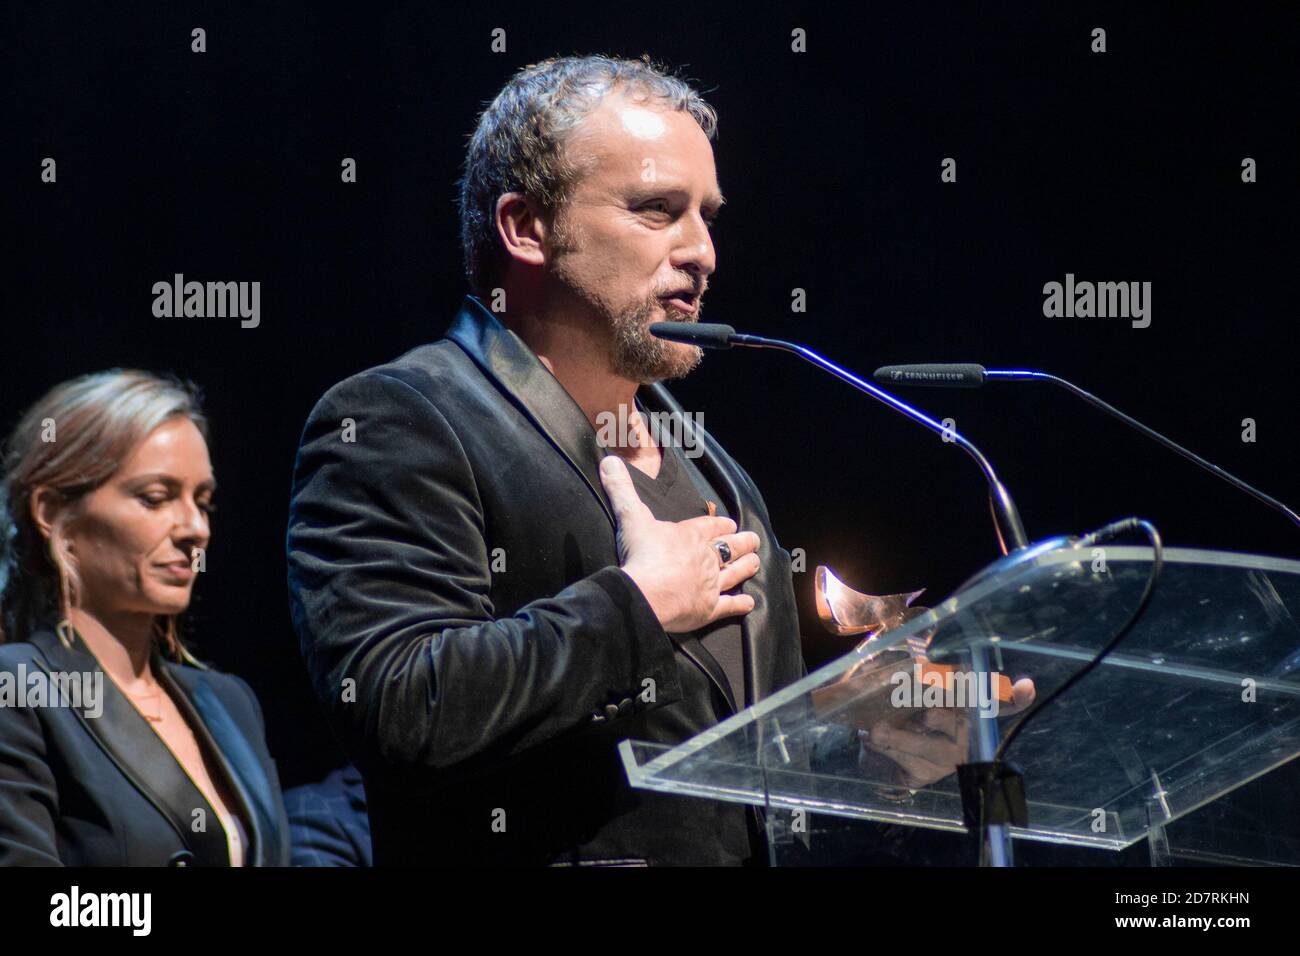 Fernando Cayo receives his award from 'Union de Actores' Awards 2020 at Teatro Circo Price in Madrid, Spain.March 09, 2020. (Oscar Gil / Alfa Images) Stock Photo